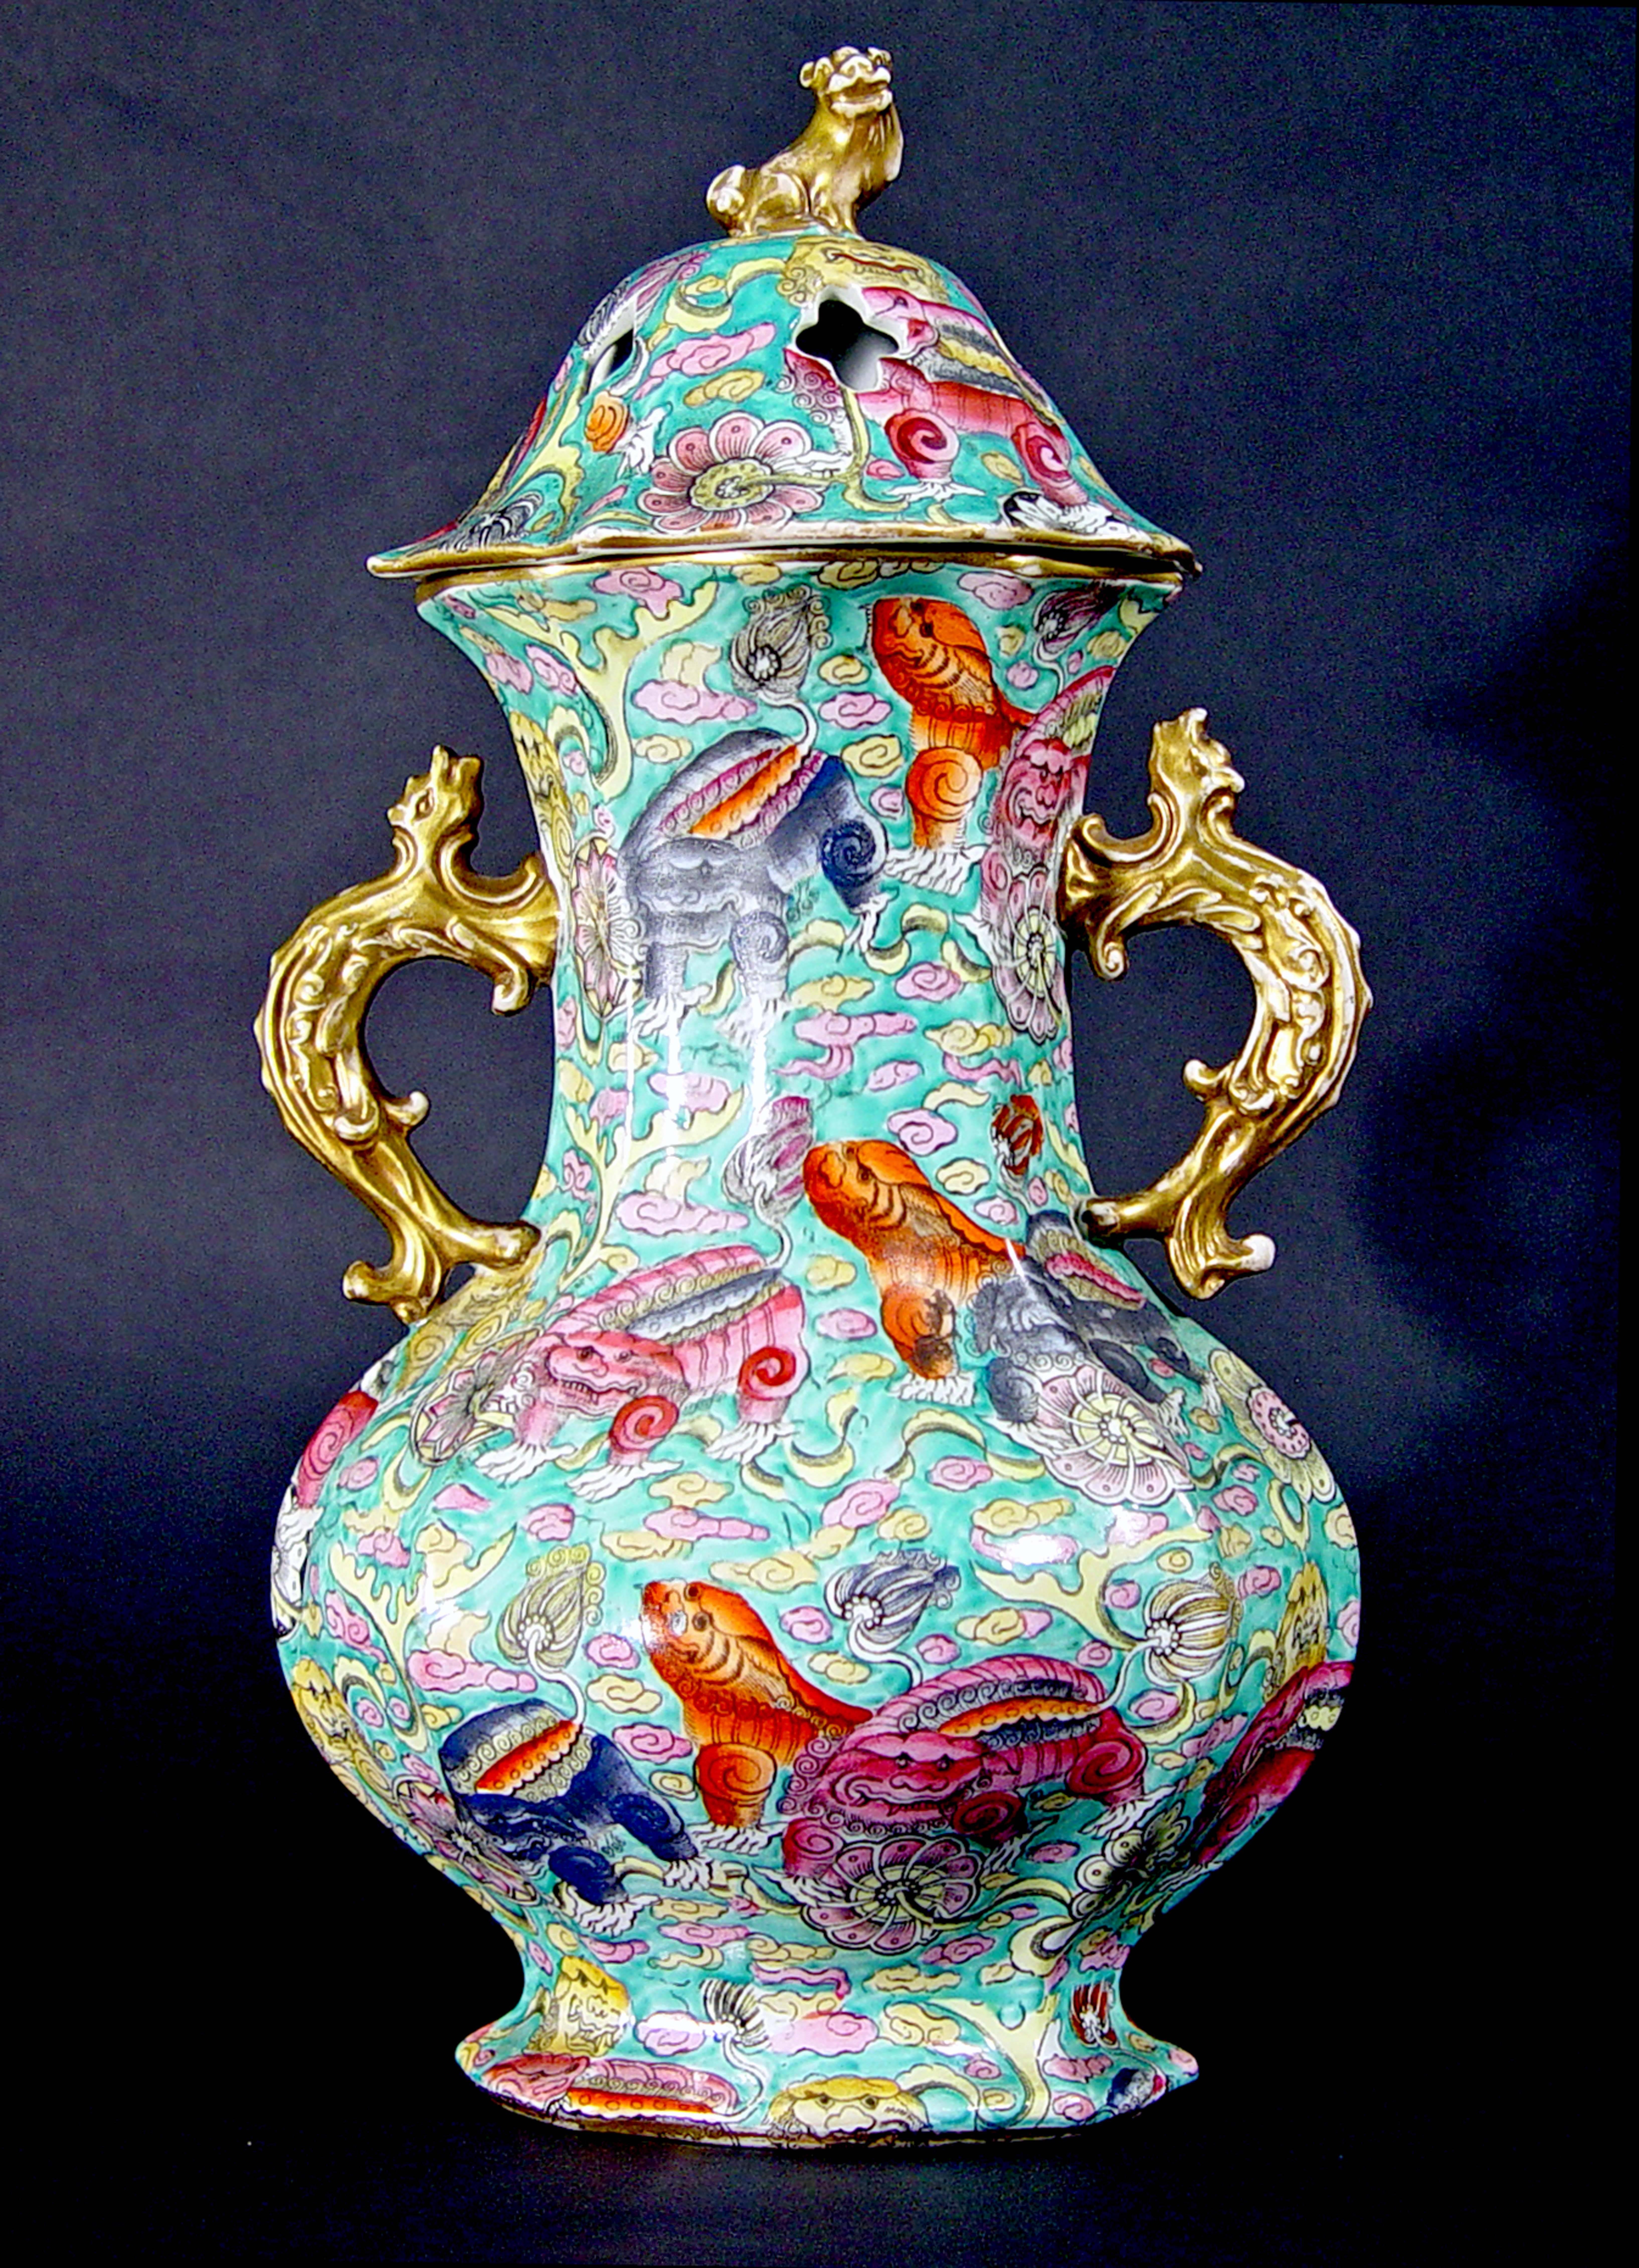 Mason's ironstone Chinoiserie vase in the Bandana pattern with a turquoise ground overlaid with different coloured kylins and flower-heads. The cover is pierced.

Reference: Mason's: The First Two Hundred Years, Gaye Blake Roberts, page 110-111.